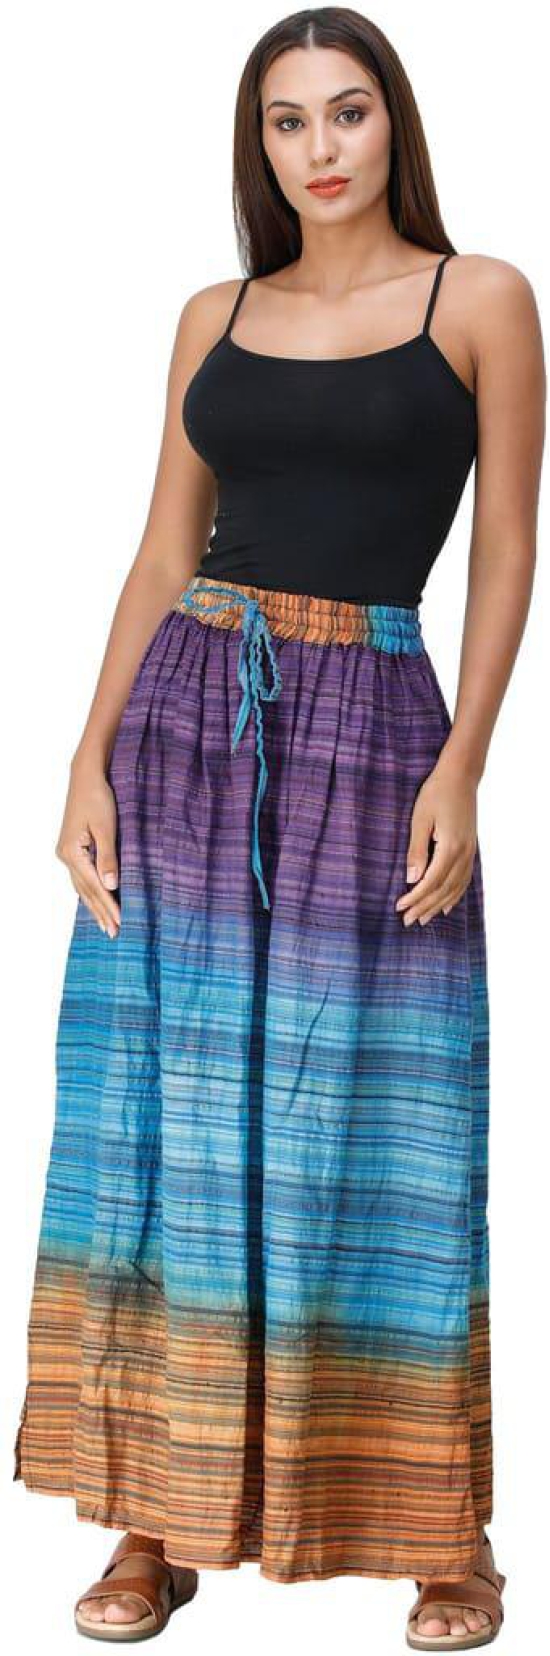 Milky-Blue Long Summer Skirt with Stripes Woven in Multi-Color Thread and Dori on Waist